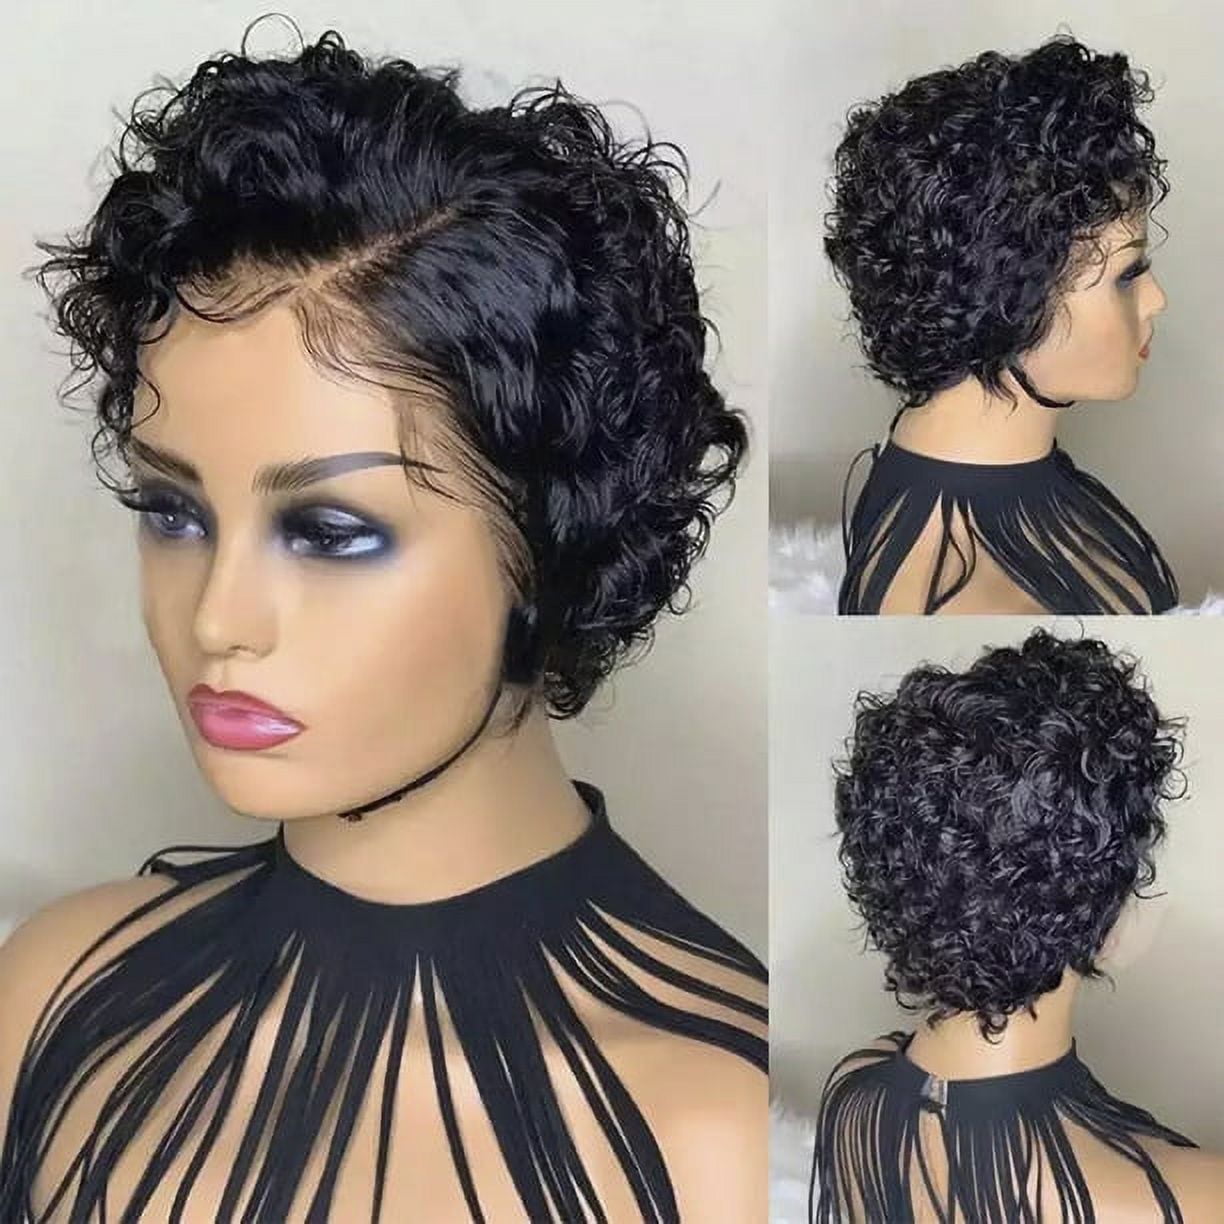 21 Easy Hairstyles for Short Curly Hair